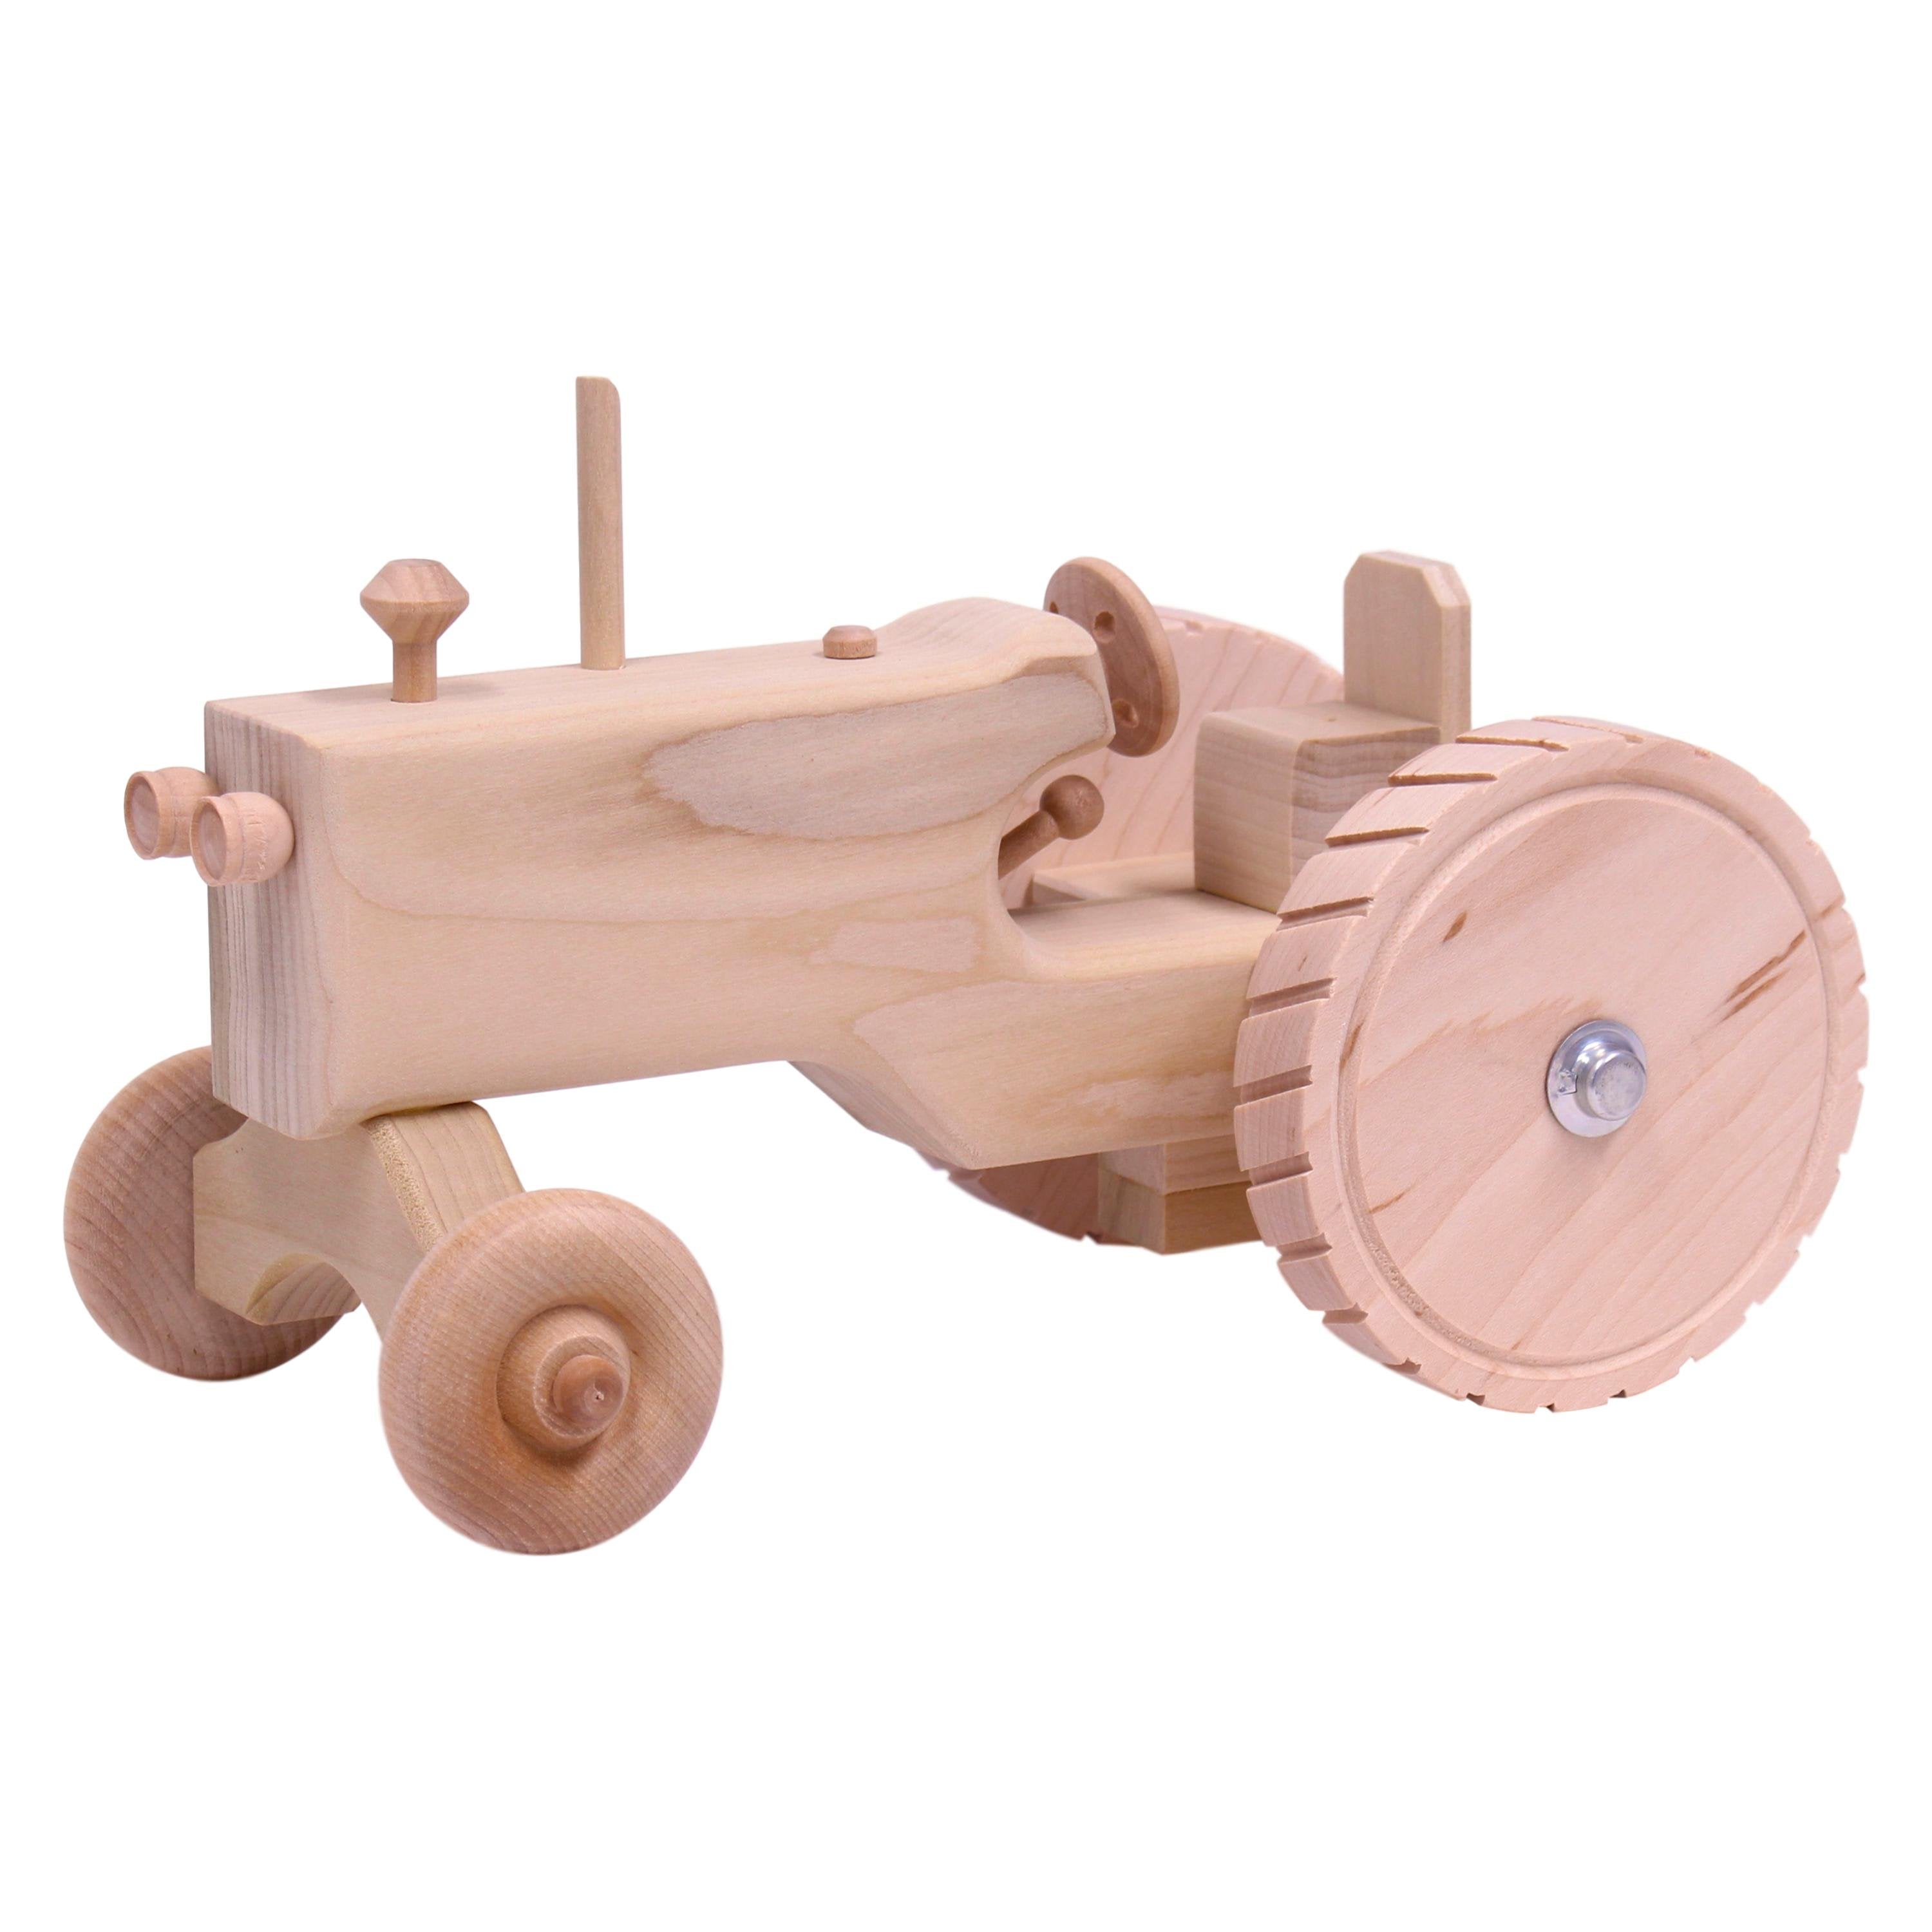 Amish-Made Wooden Tractor Toy –